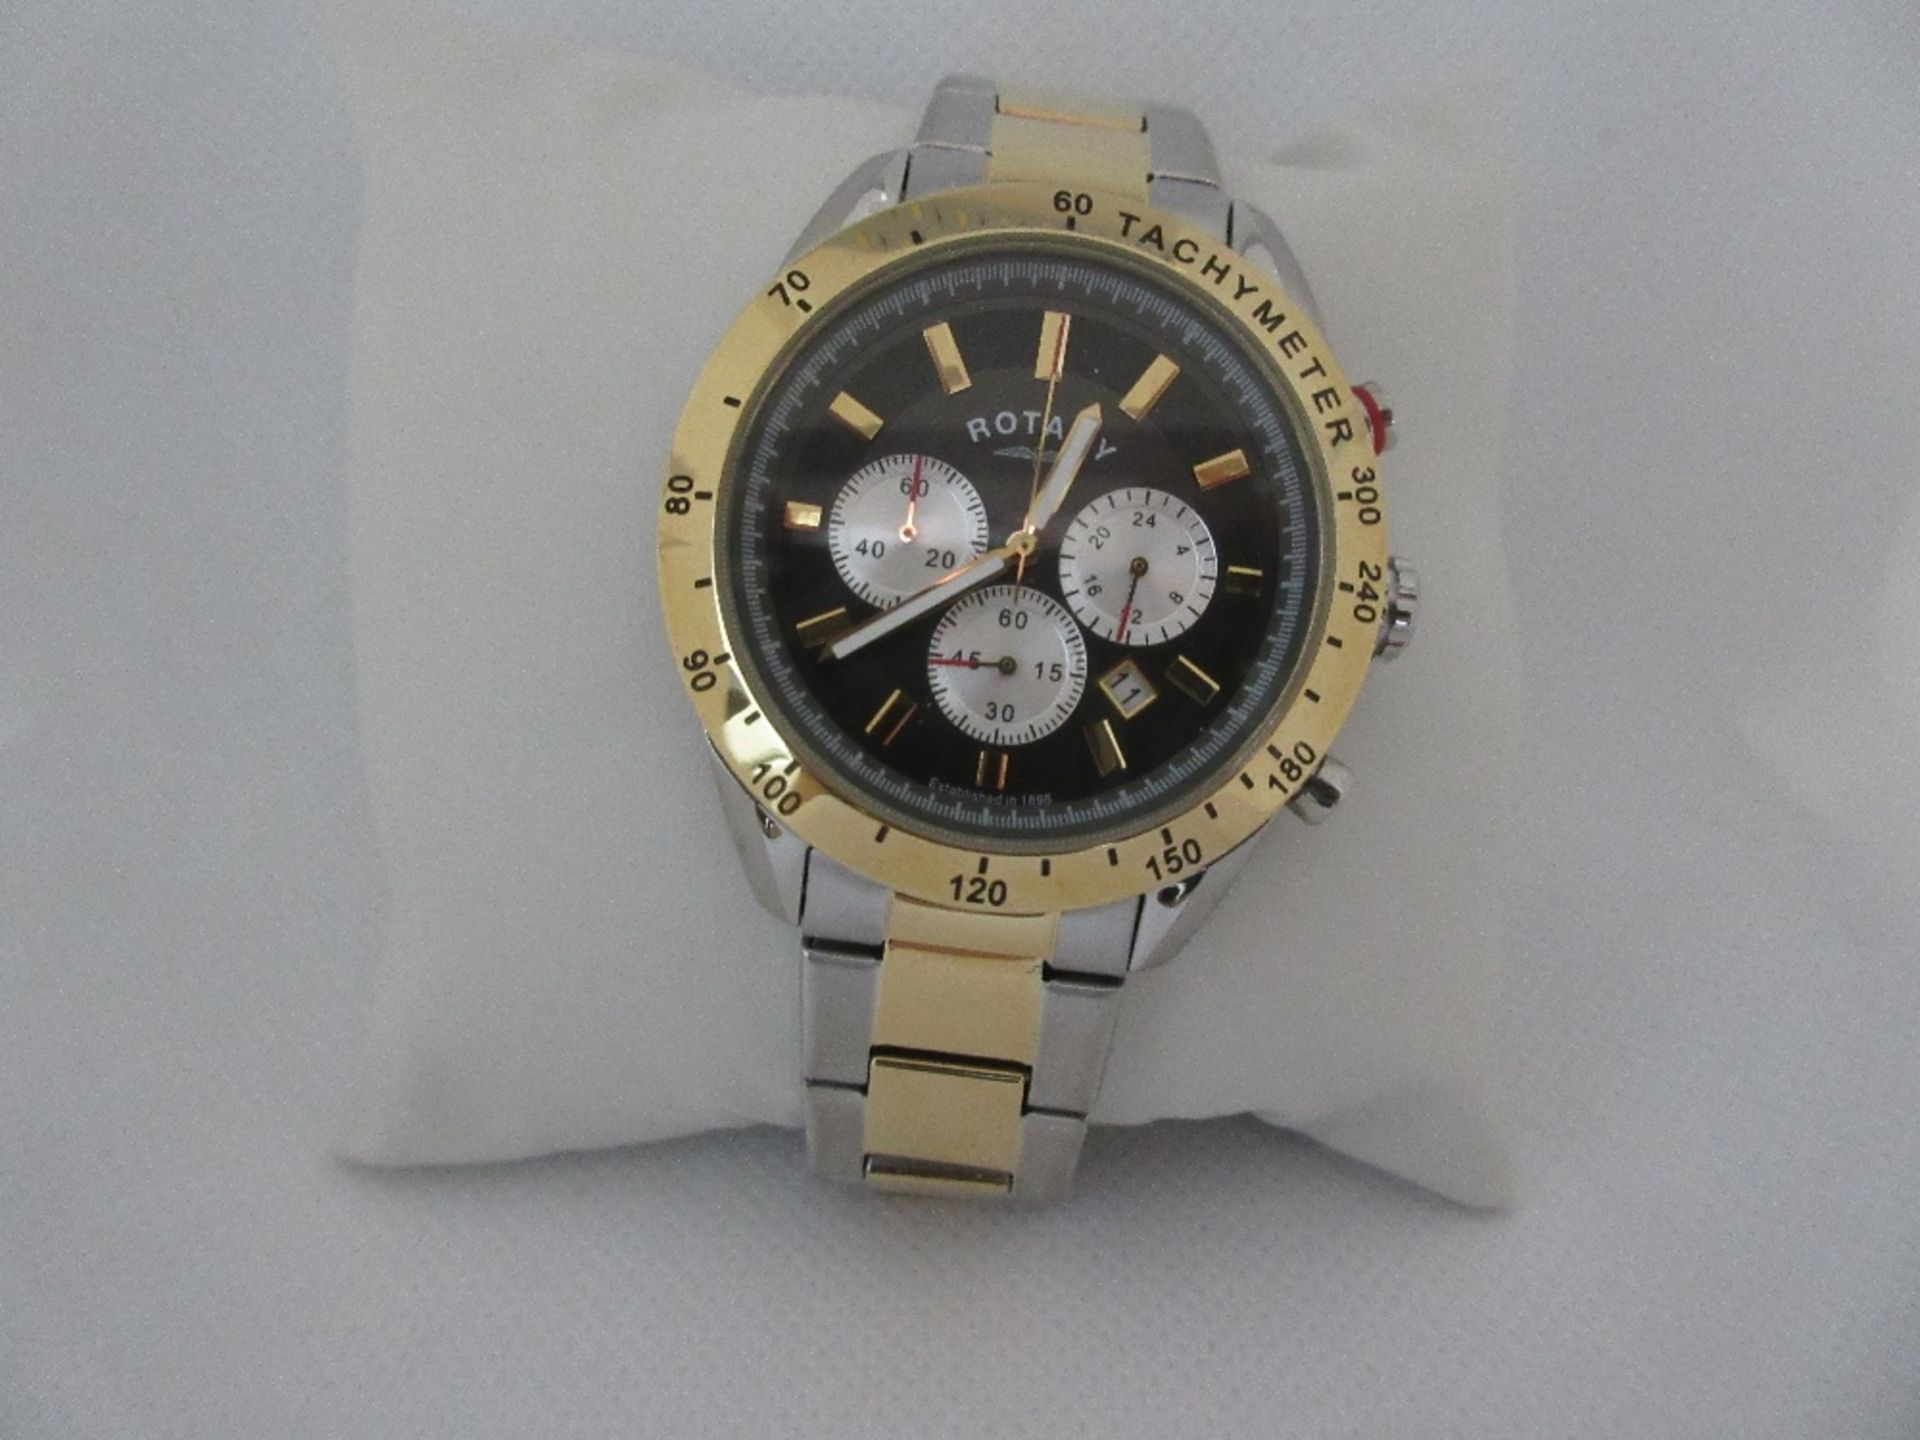 ROTARY MALE WATCH, MODEL GB03429/20, CASE DIAMETER 42MM, STAINLESS STEEL STRAP, BOXED, RRP £ 169 - Image 2 of 3